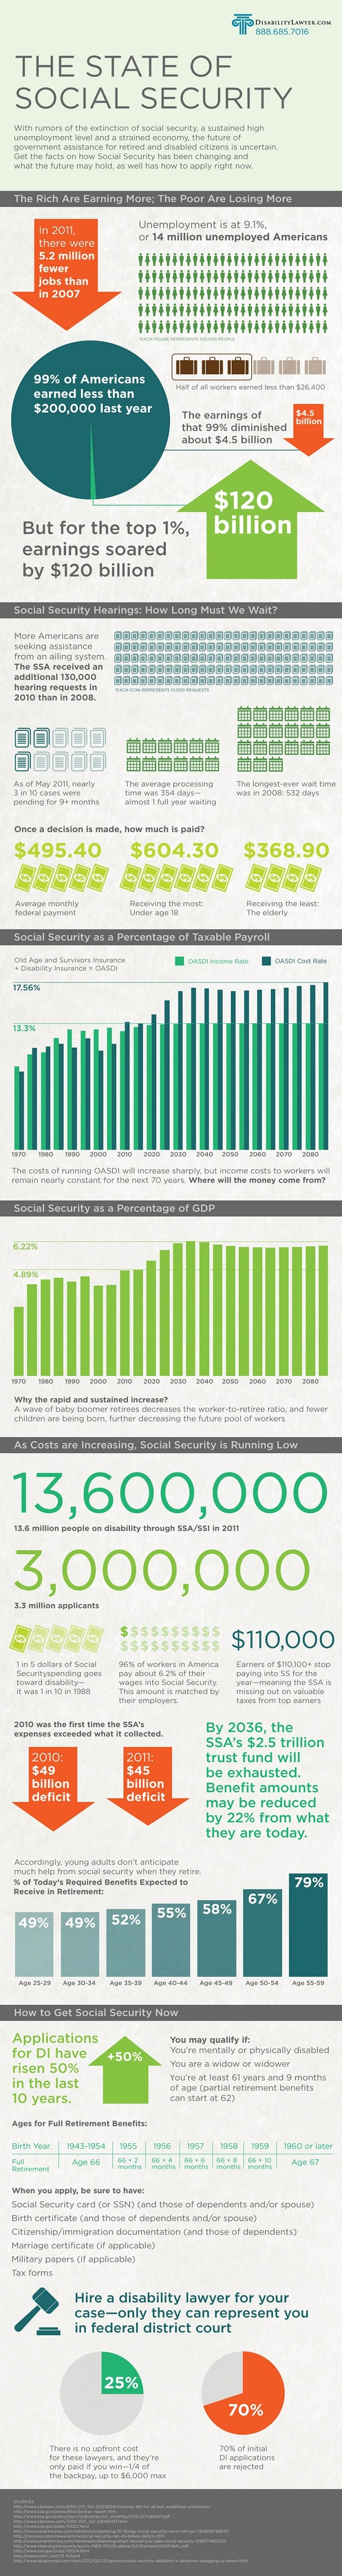 social security infographic